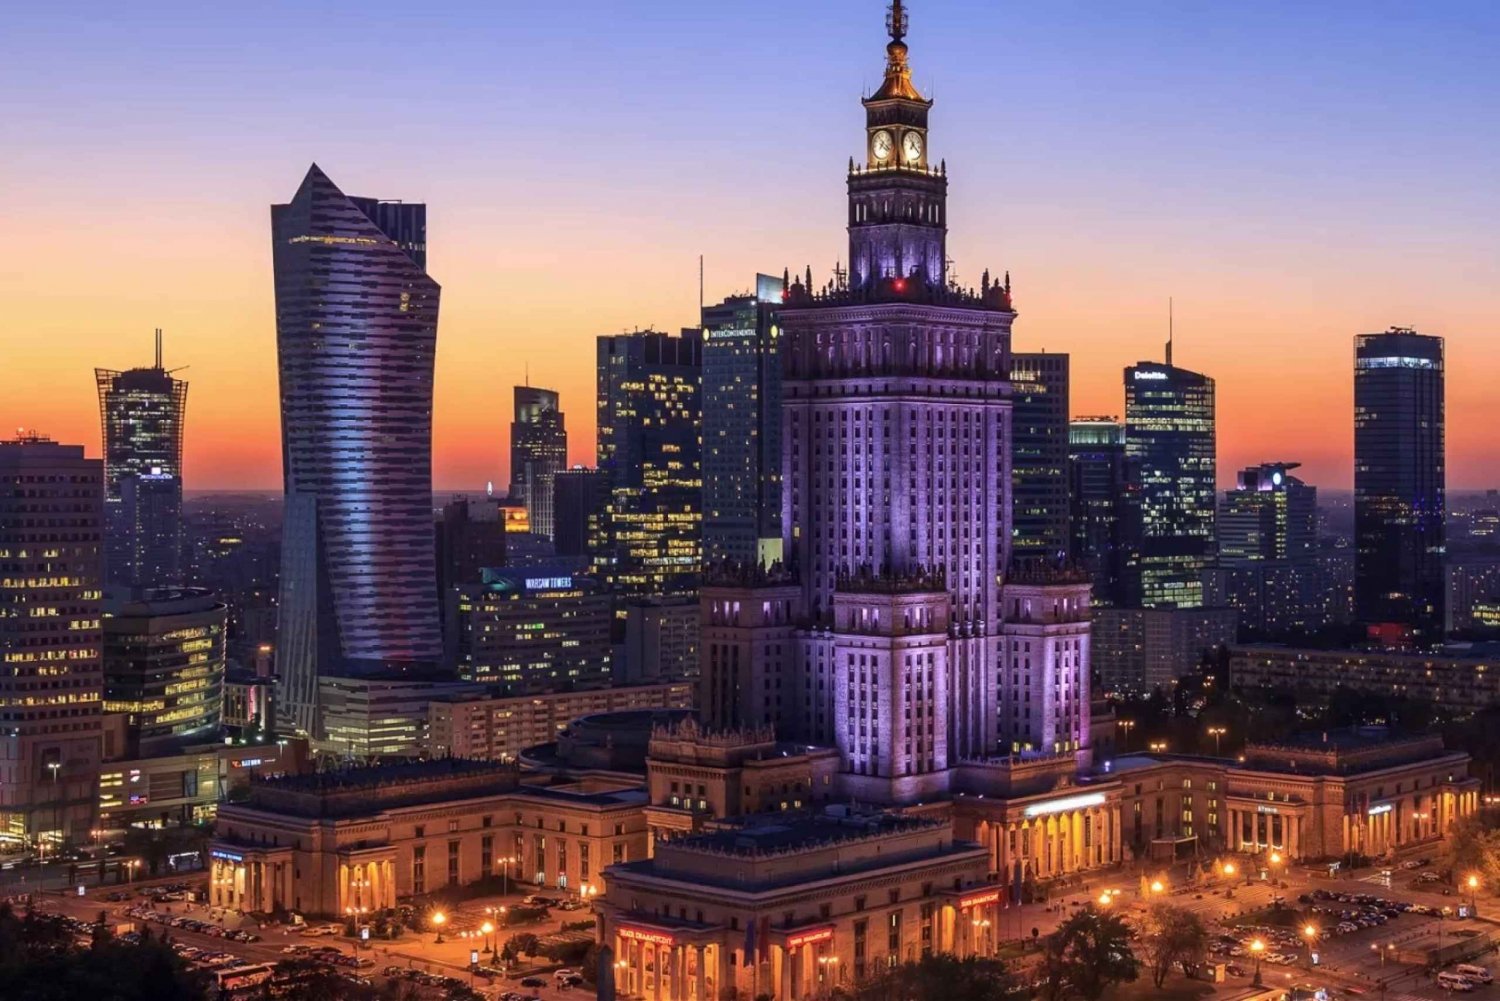 Warsaw: Palace of Culture and Science and POLIN Museum Tours